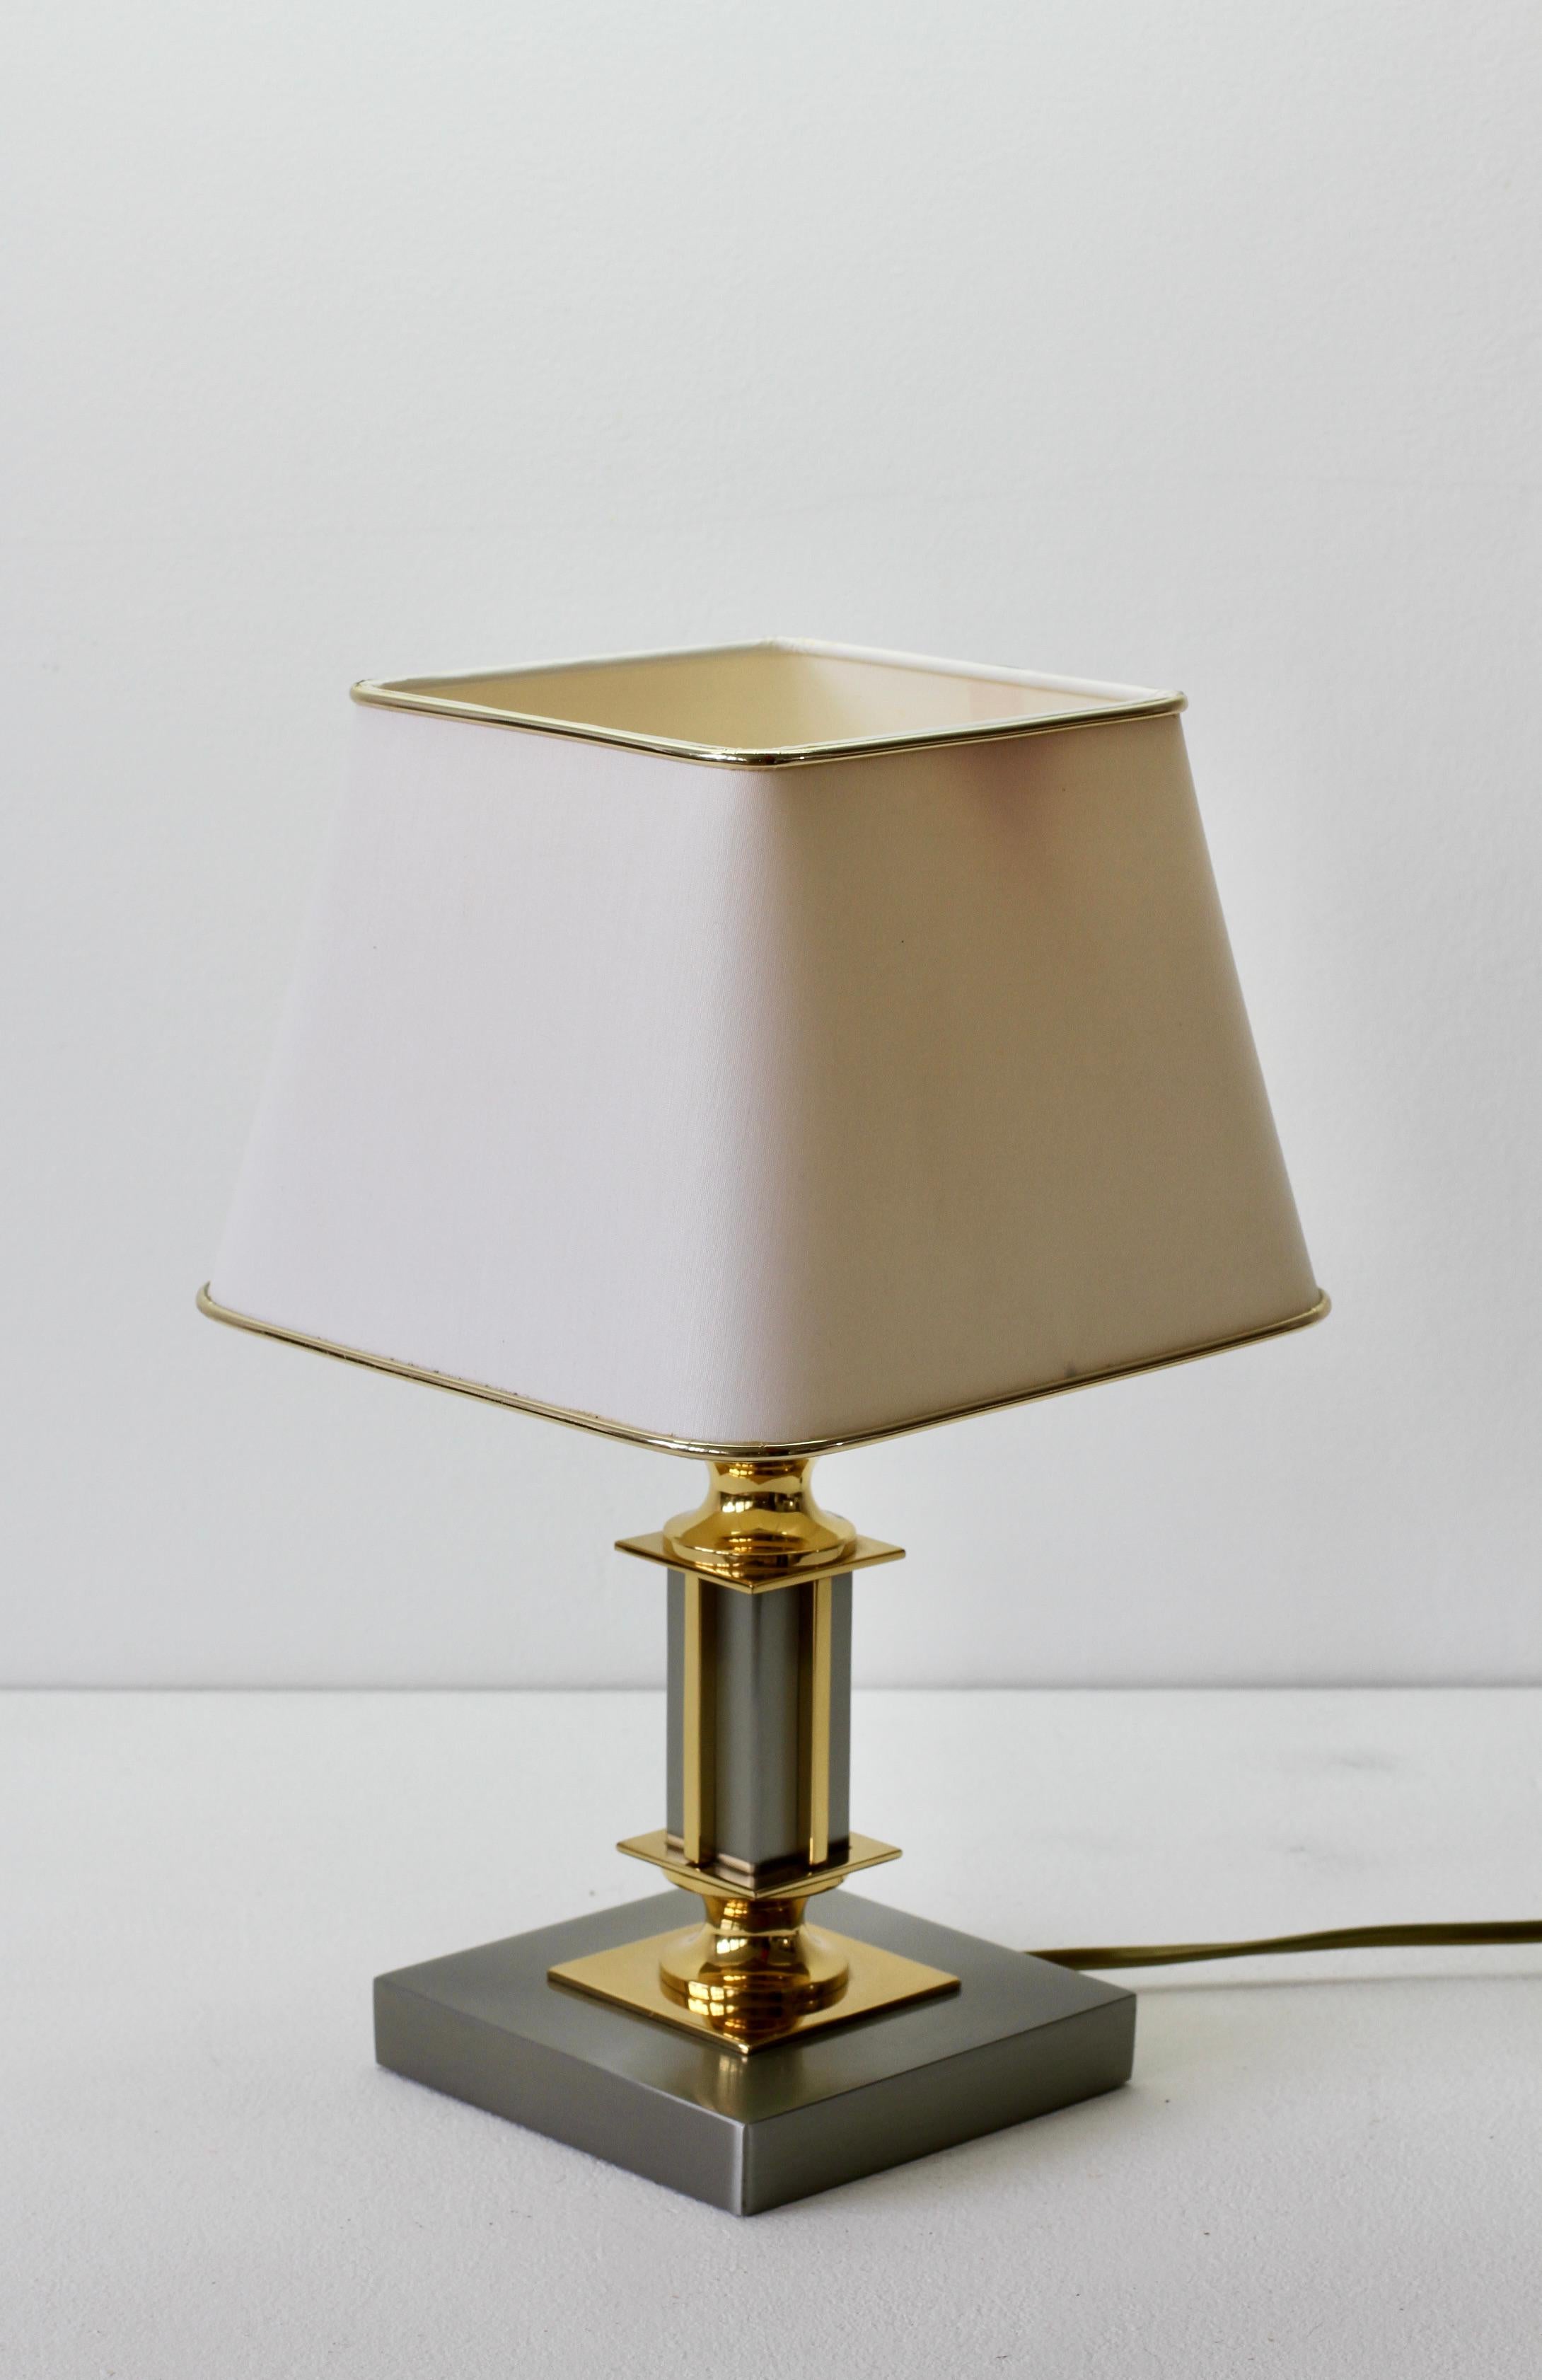 Vintage Brass & Brushed Steel Maison Jansen Style Table Desk Lamp, circa 1980s For Sale 5